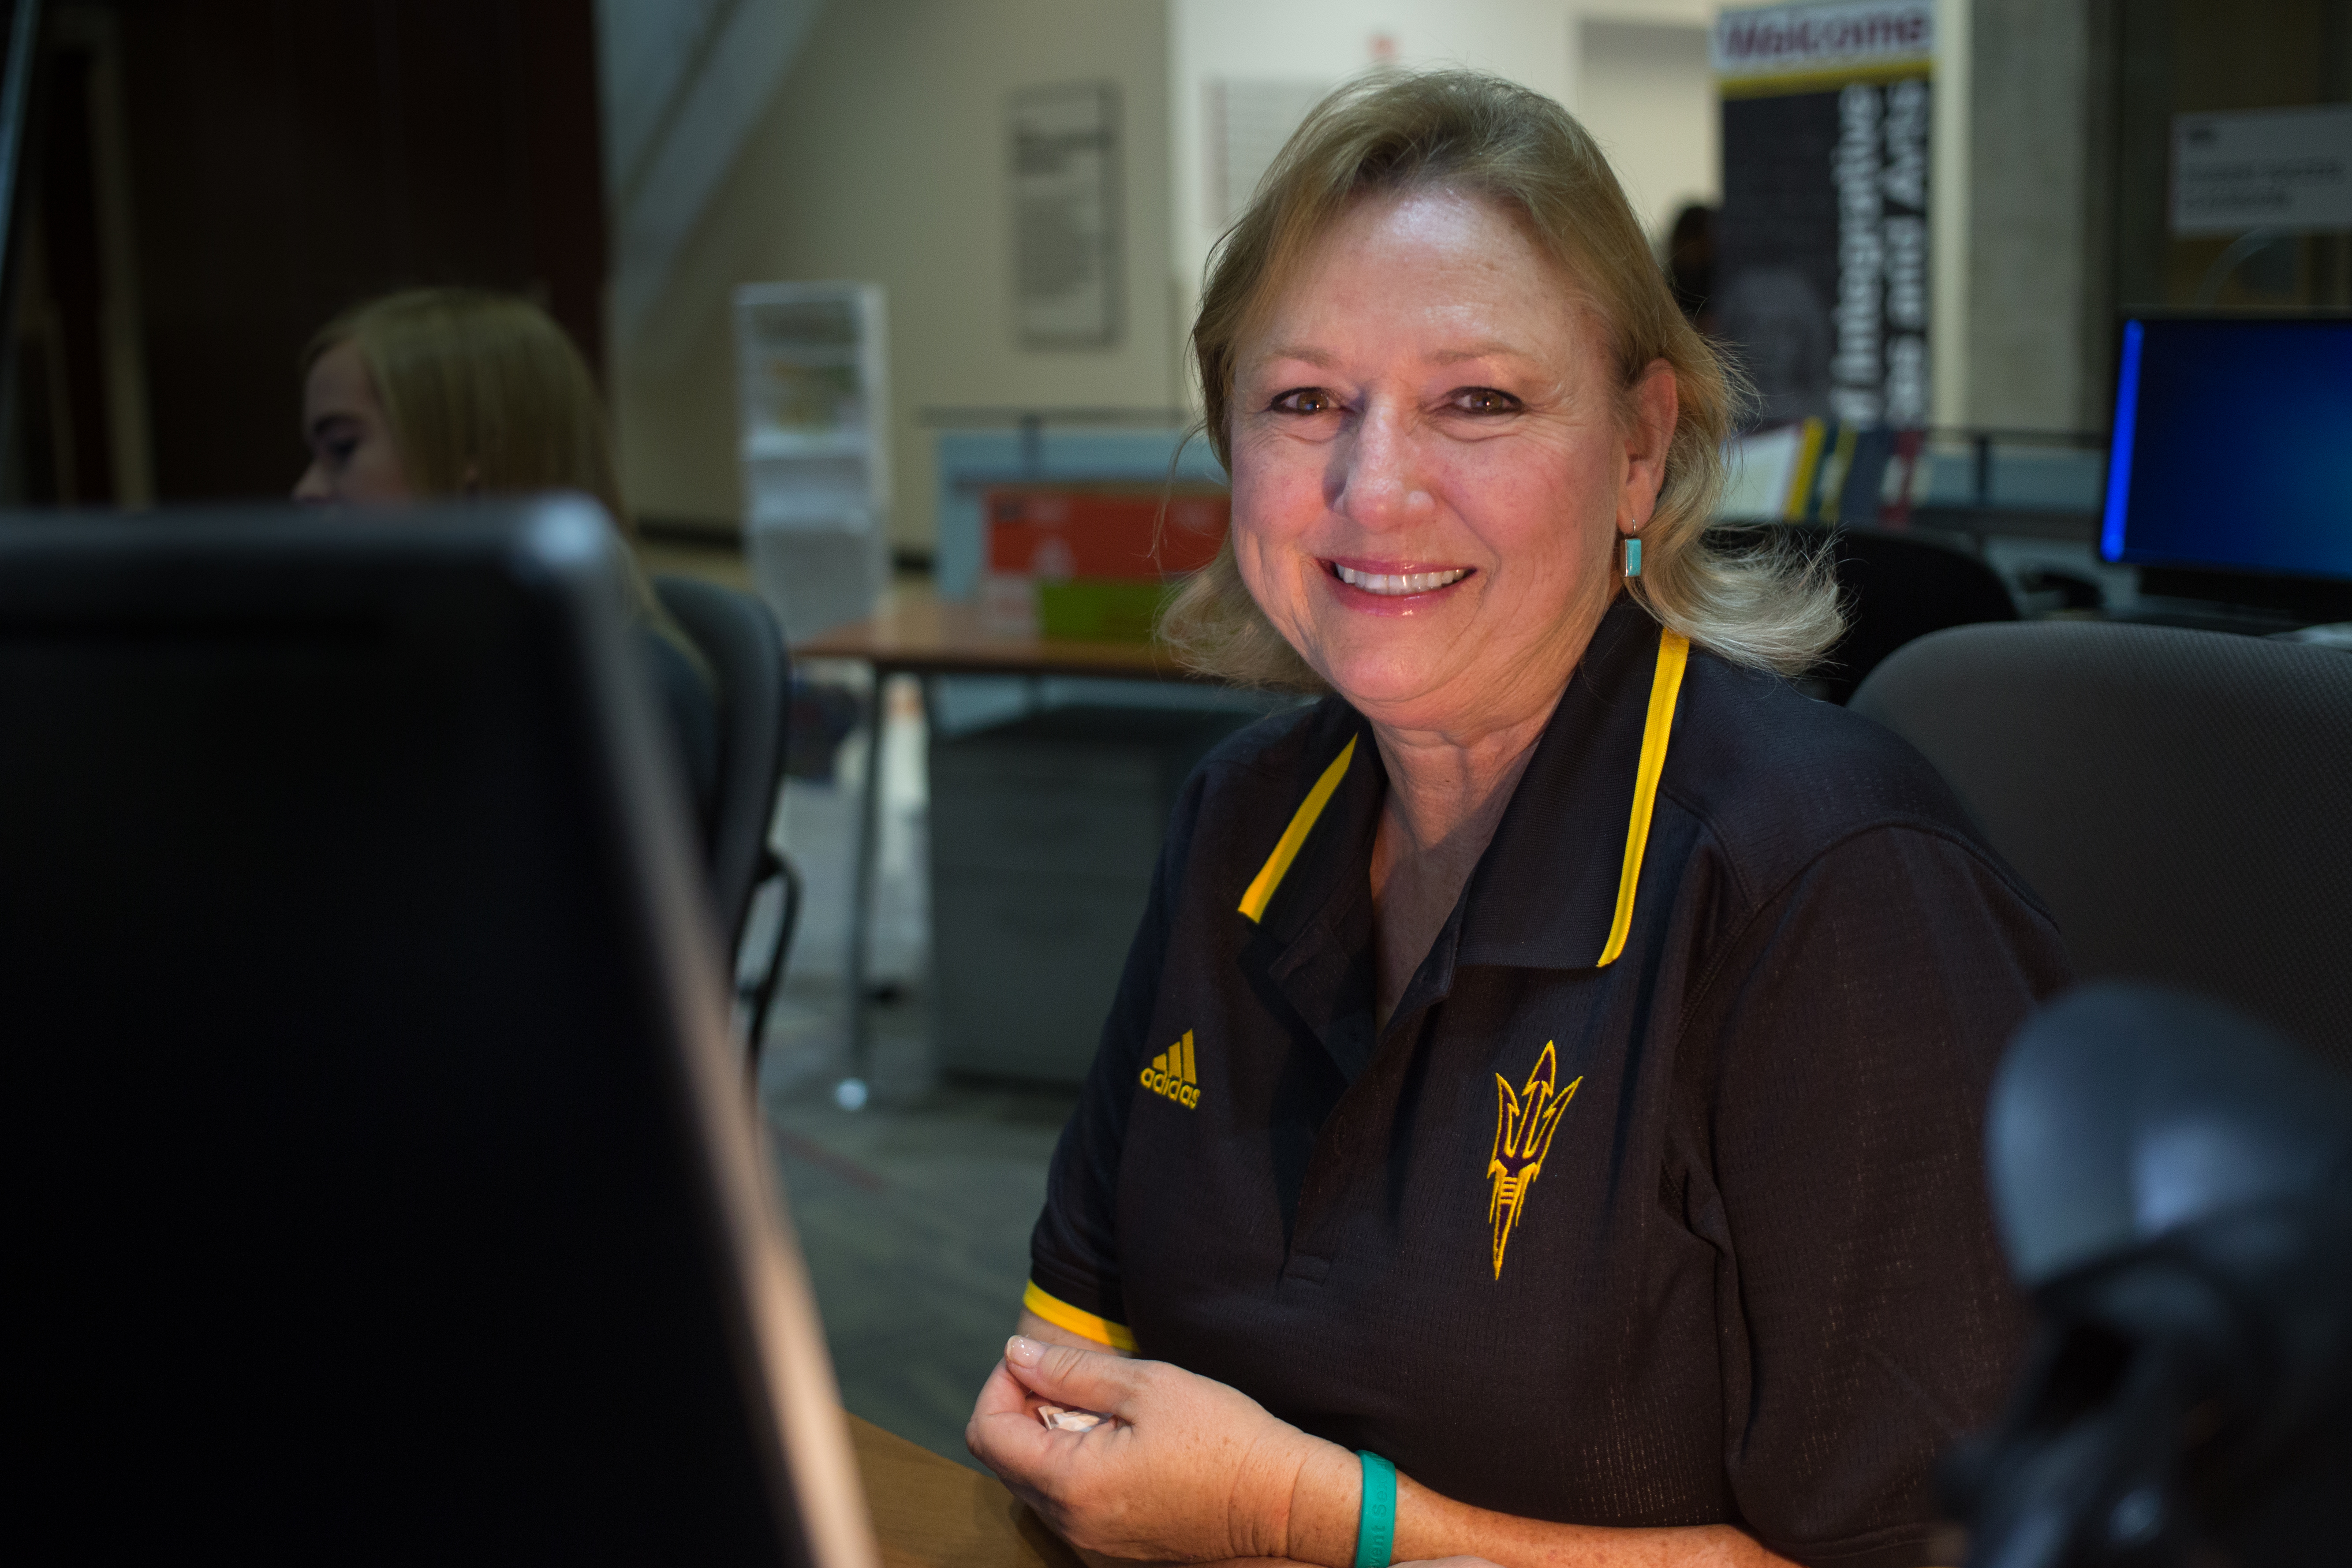 ASU's Sue Foley earns interdisciplinary studies degree while being point of help for Downtown Phoenix campus students, families at Info Desk